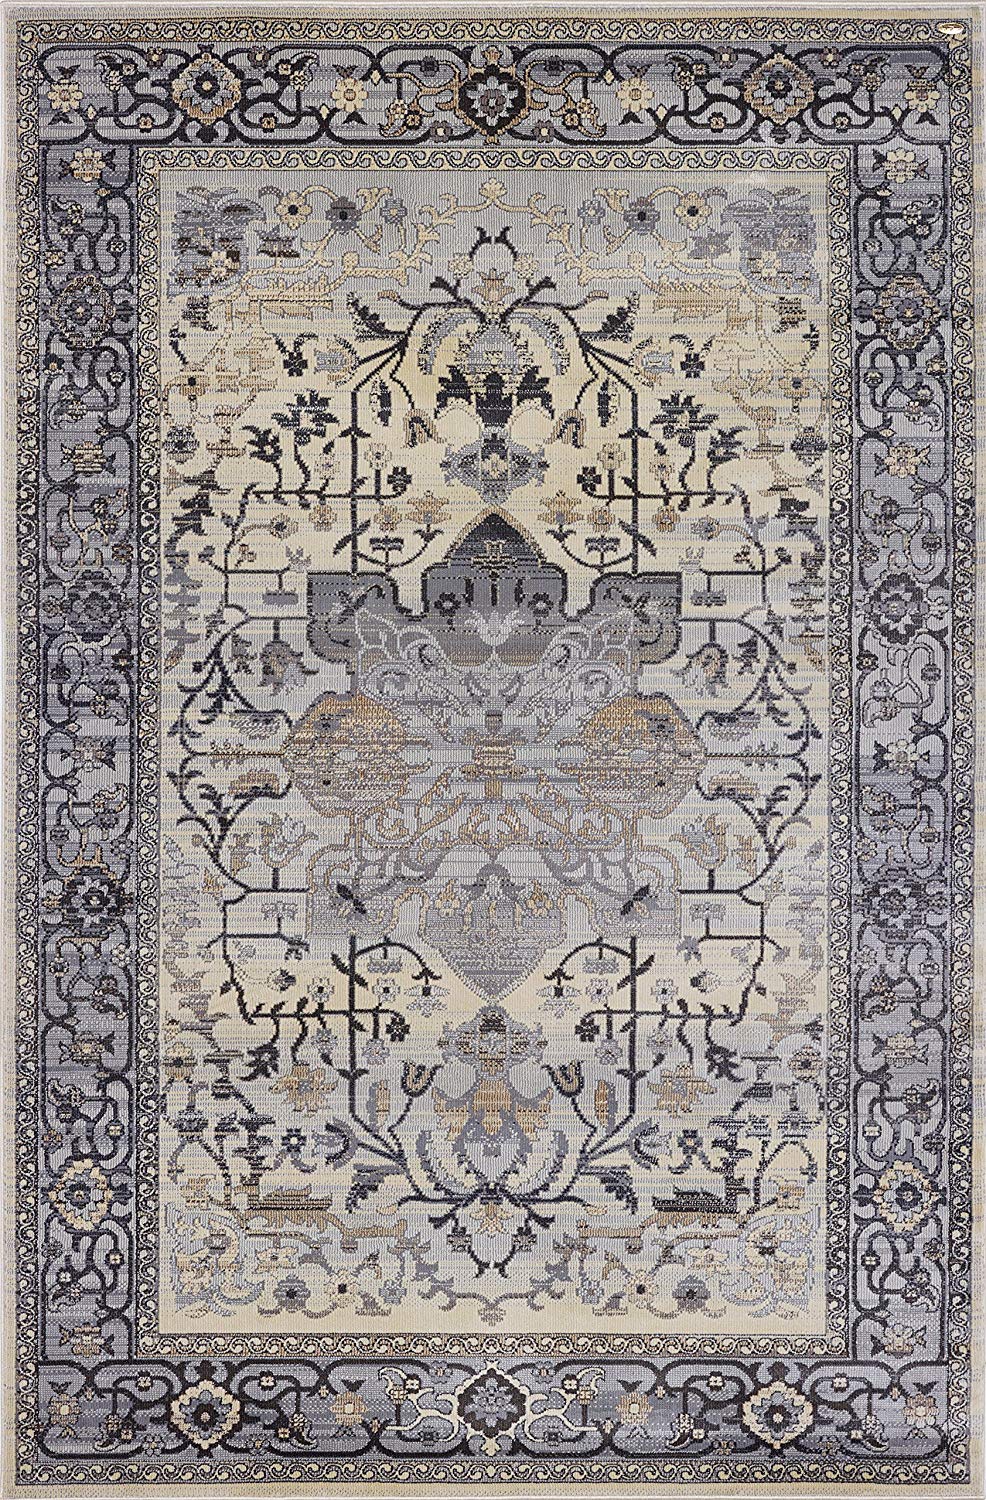 area rugs 8x10 area rug 5x7 5x8 blue luxury bedroom 8x10 clearance living room for vintage gray grey traditional bohemian kitchen rugs for bedroom living room abstract rugs area patterns oriental accent rugs contemporary